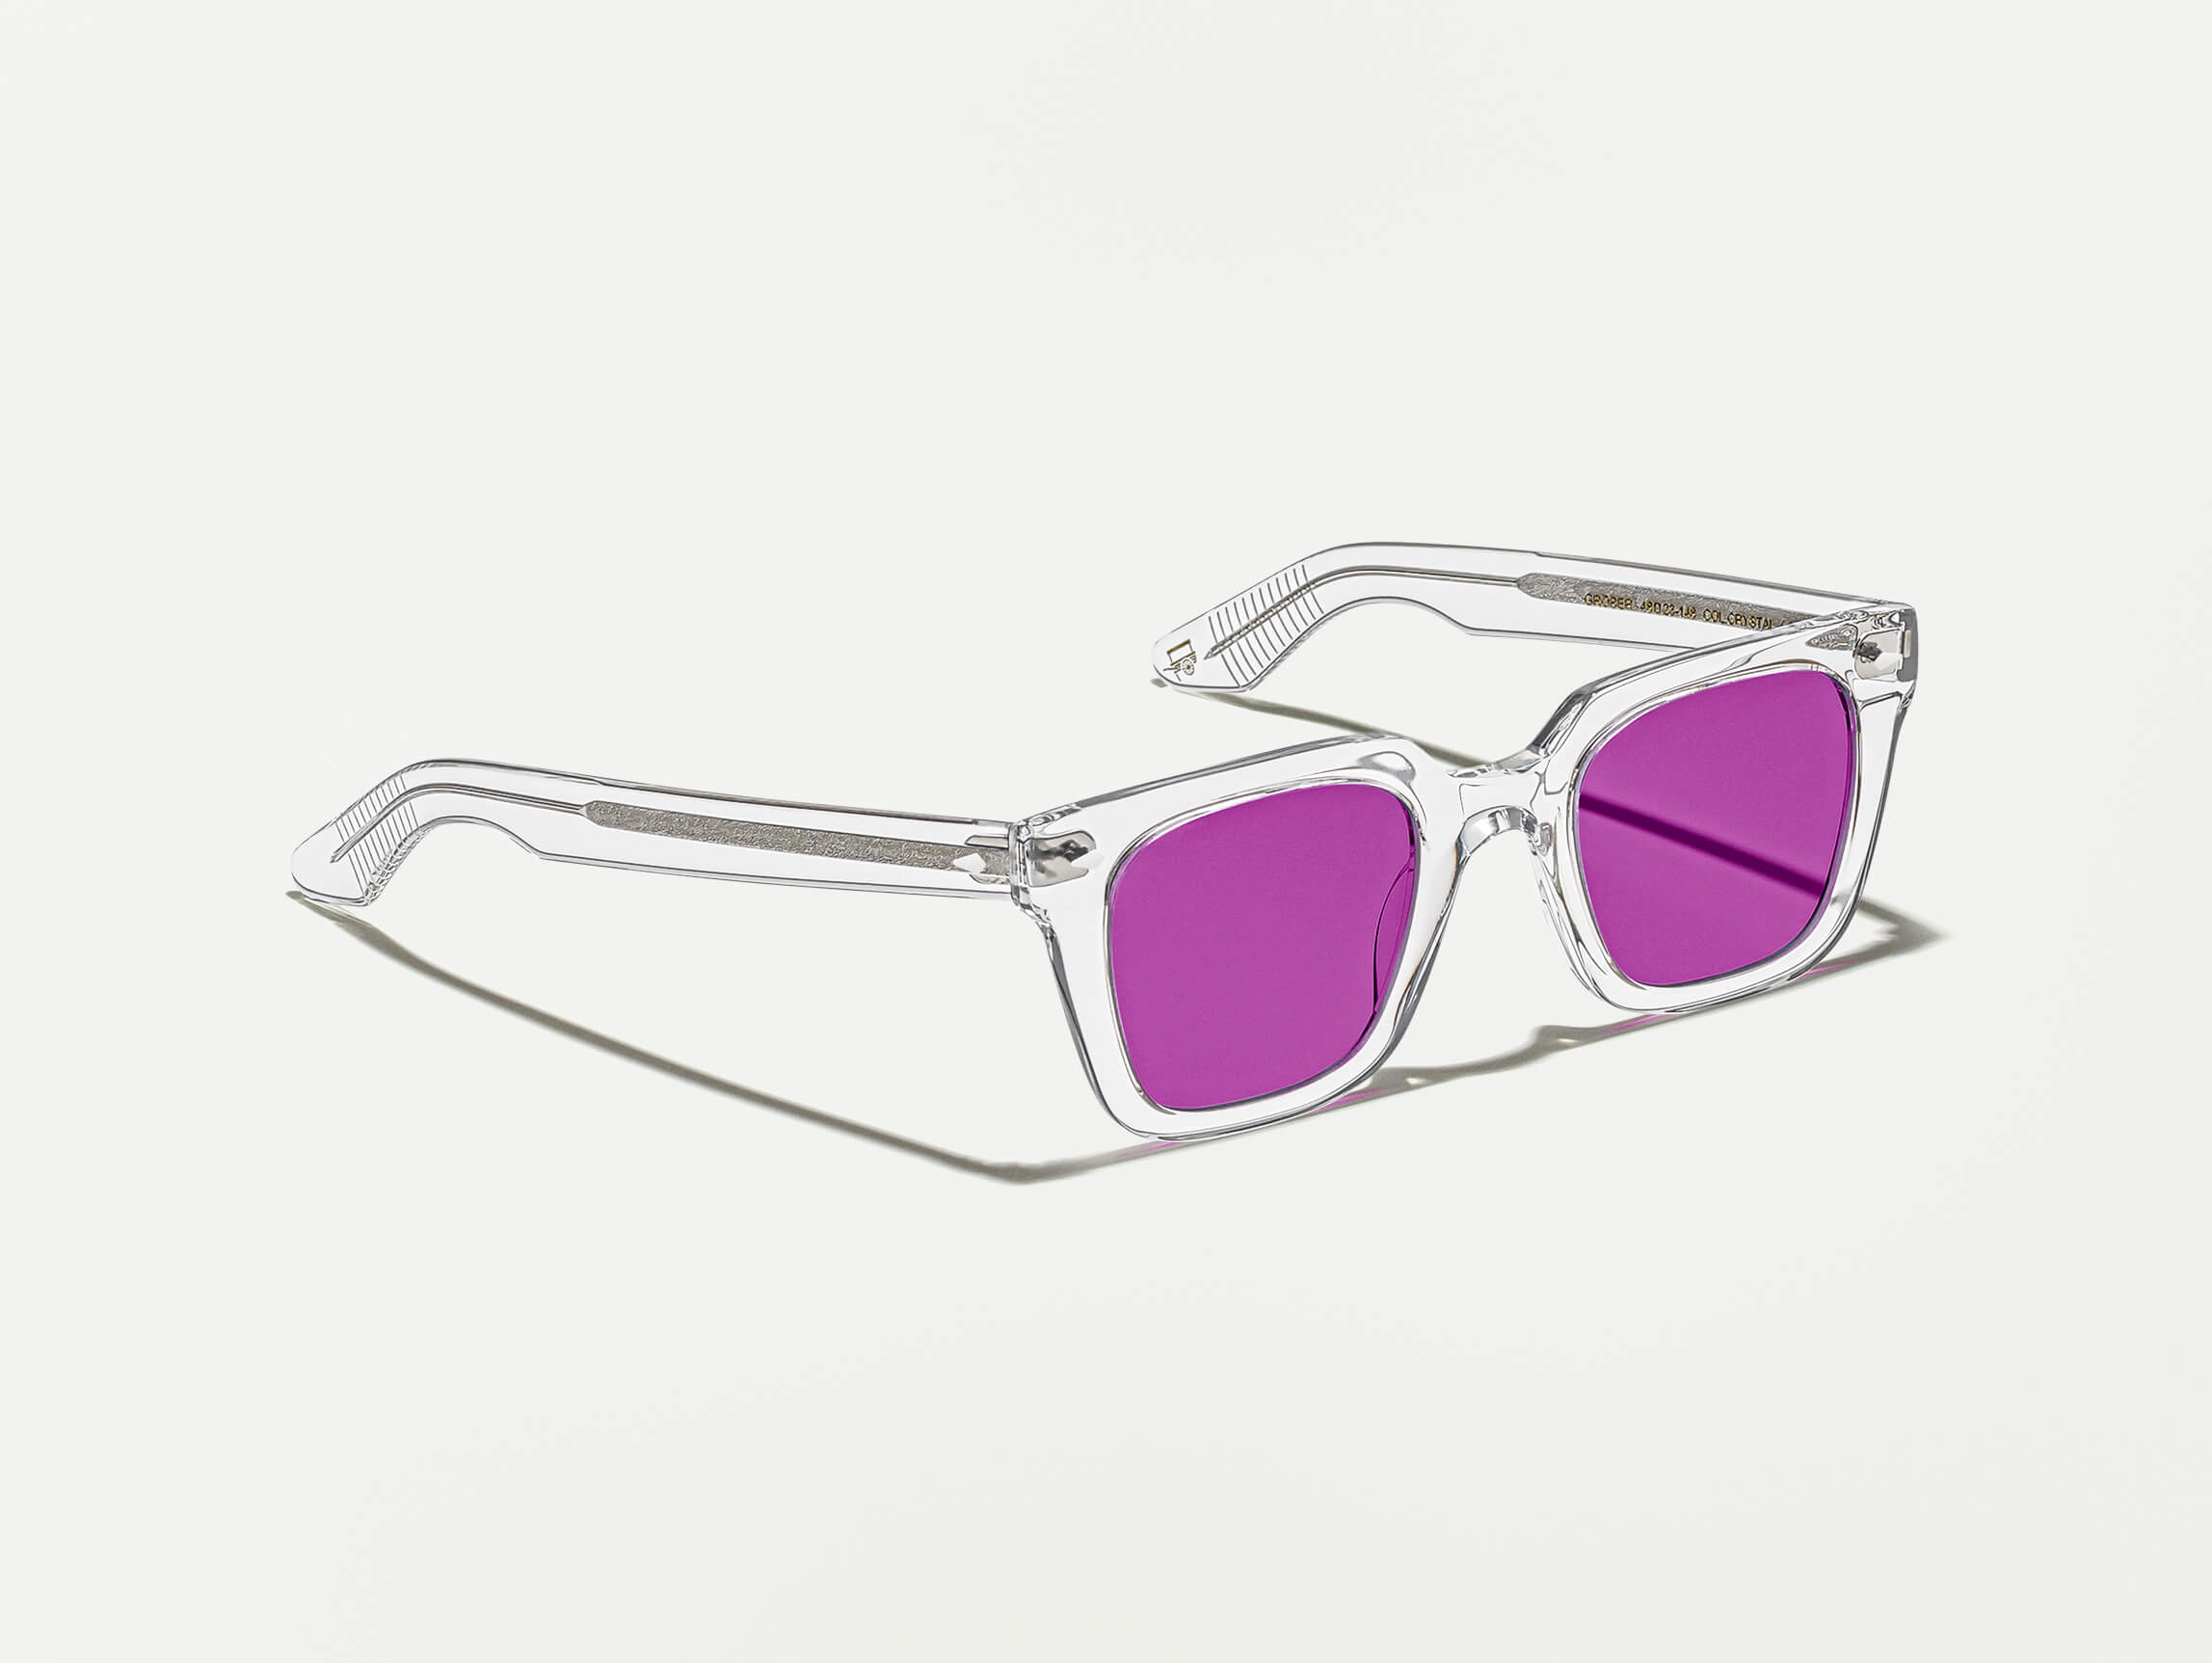 The GROBER Crystal with Purple Nurple Tinted Lenses